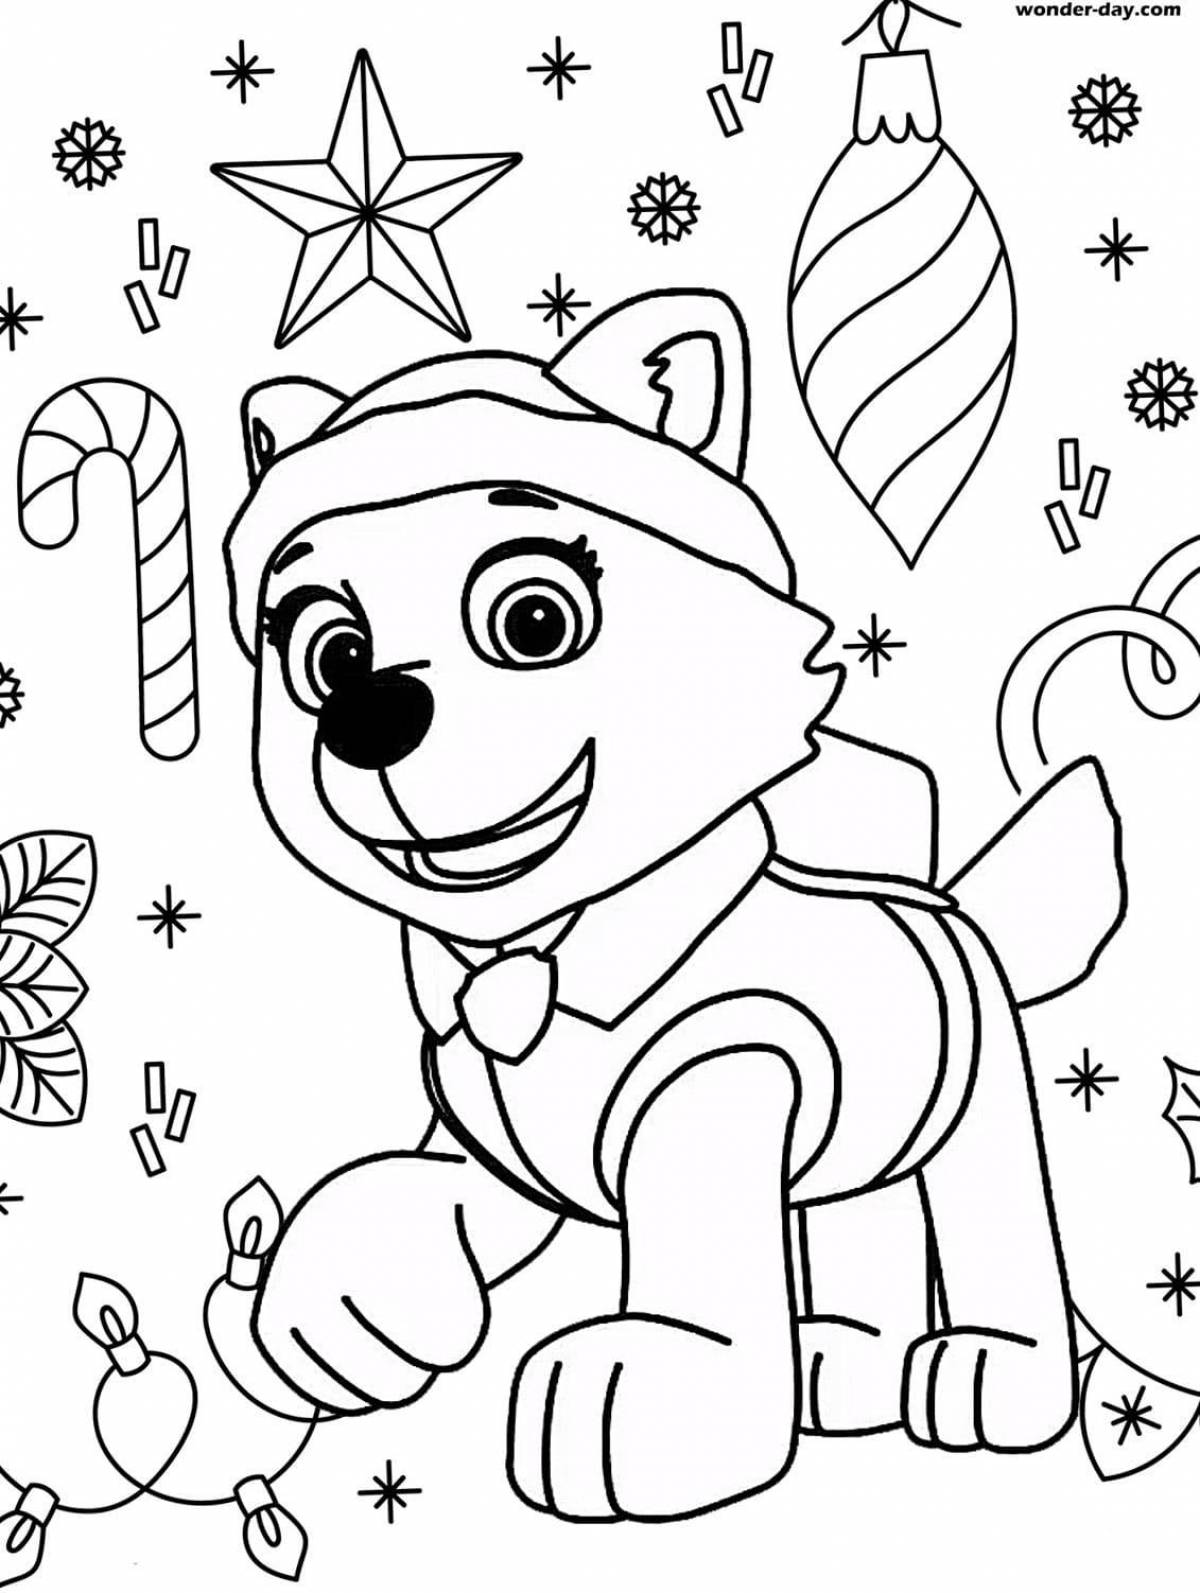 Awesome everest paw patrol coloring page